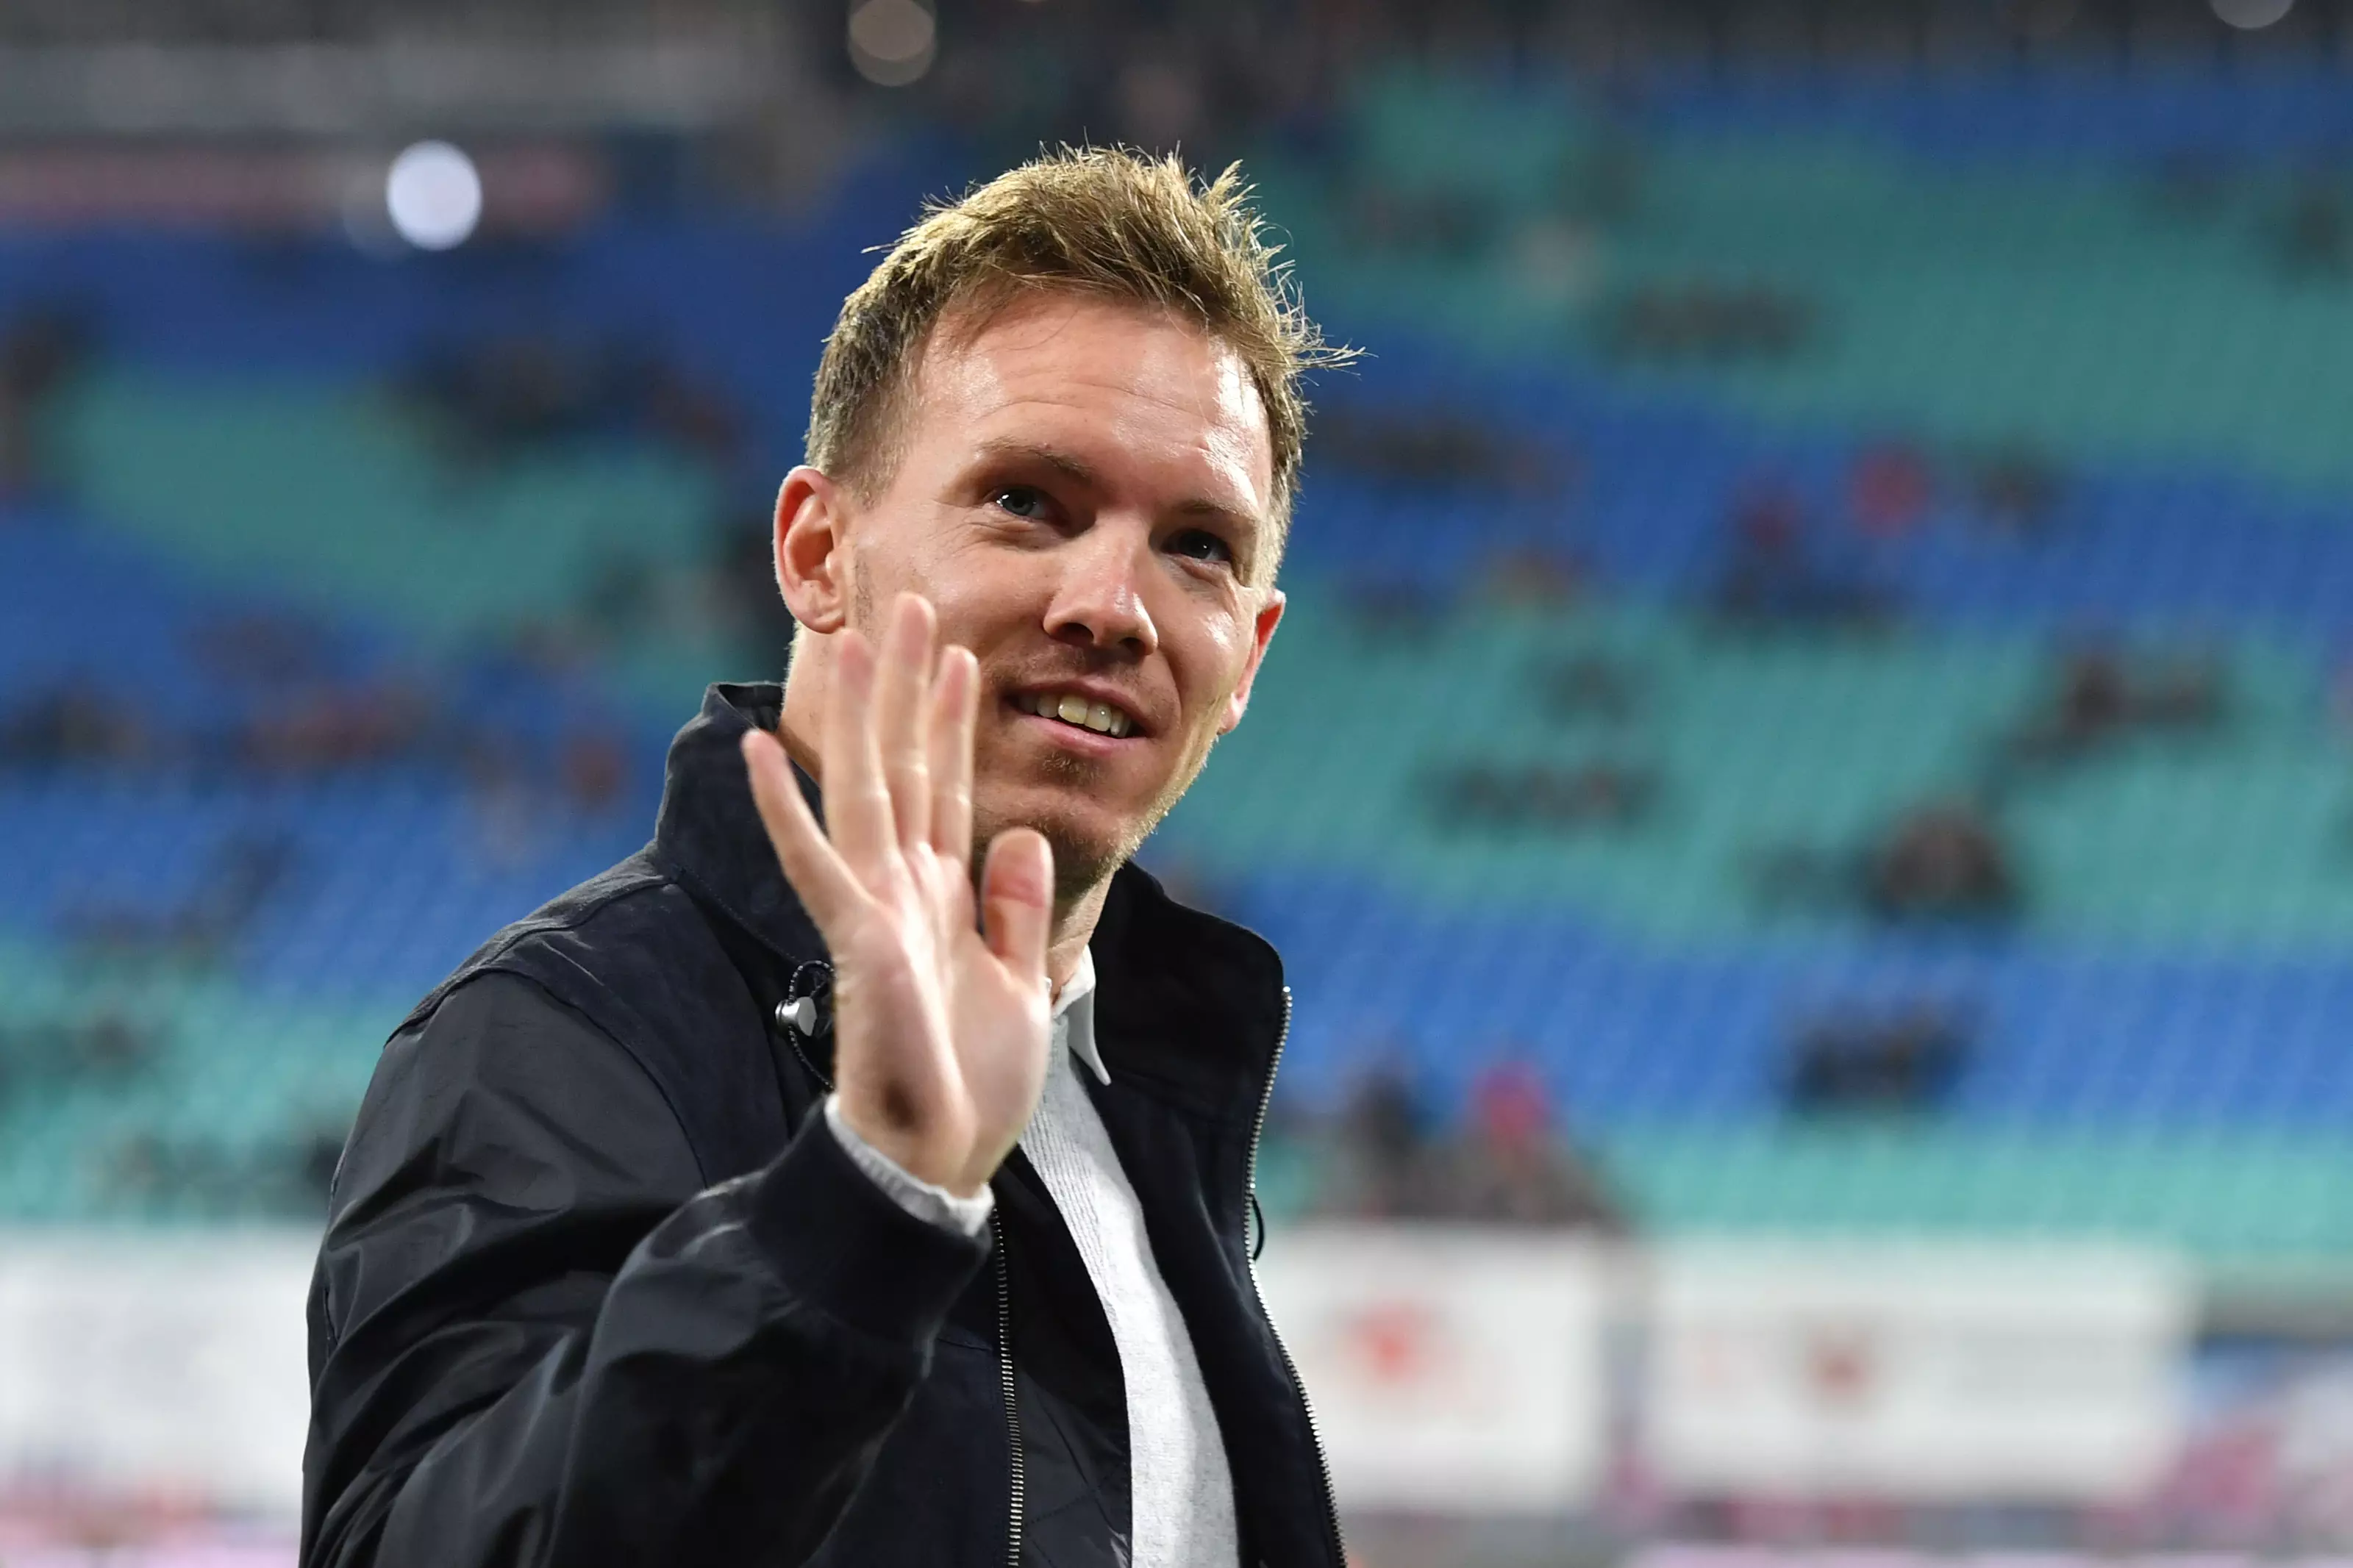 Nagelsmann will be joining Bayern in the summer. Image: PA Images